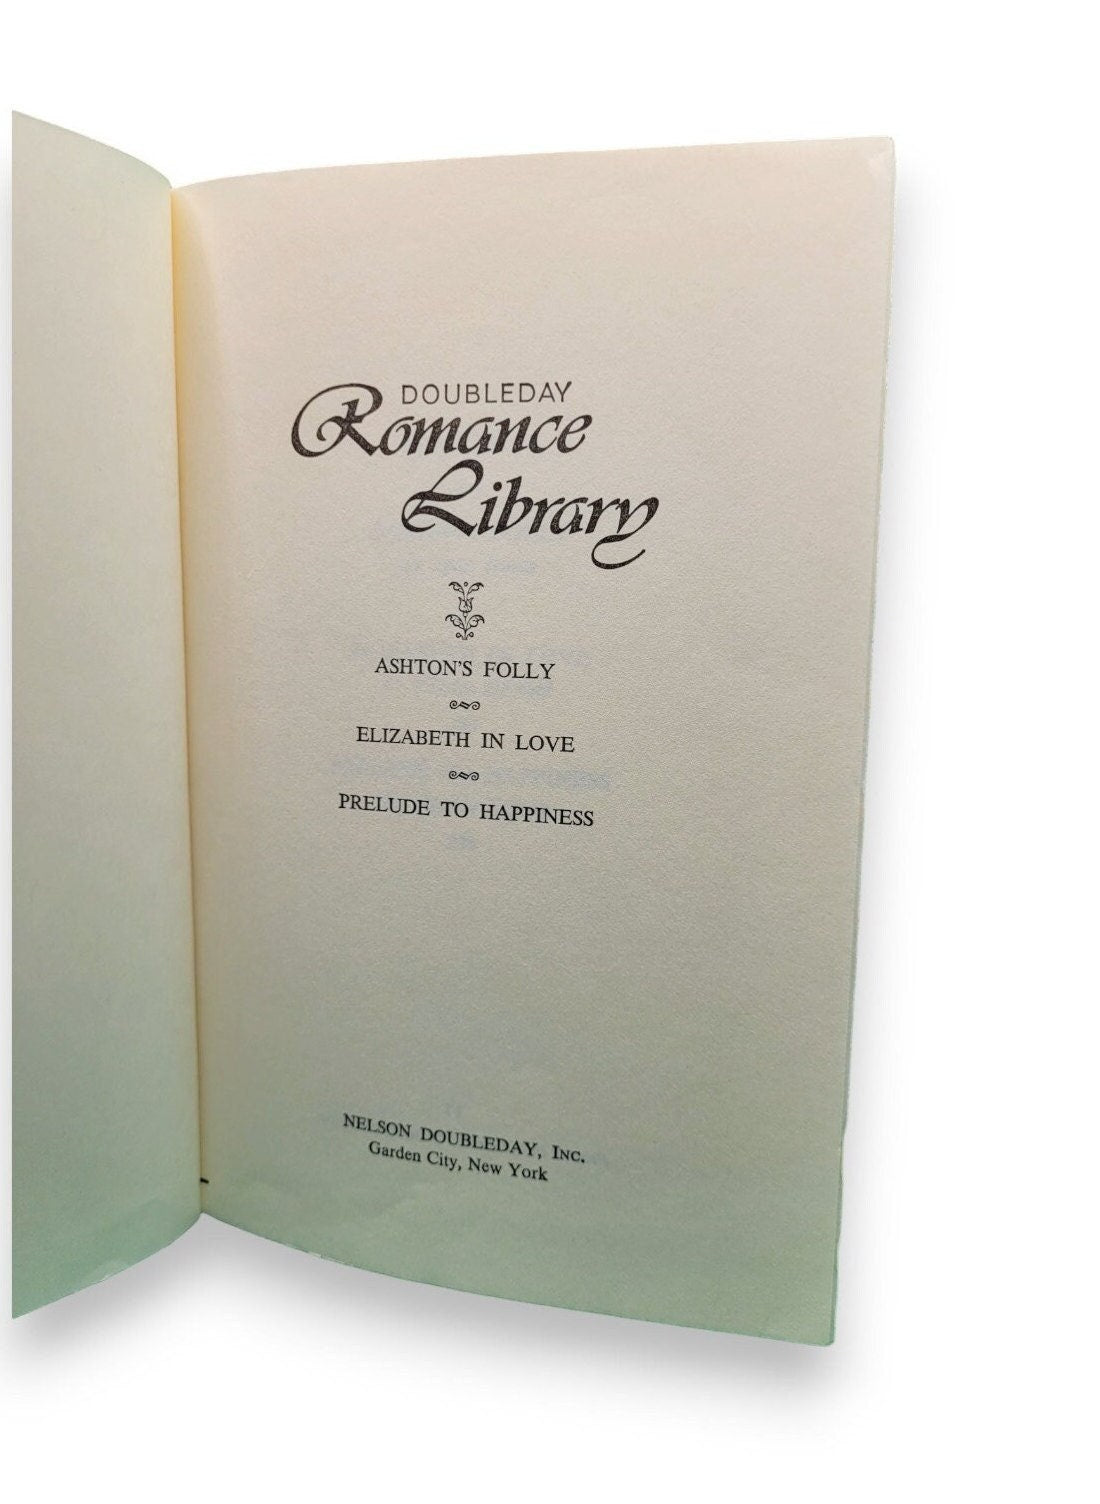 Doubleday Romance Library (Ashton's Folly, Elizabeth in Love, Prelude to Happiness) 1979